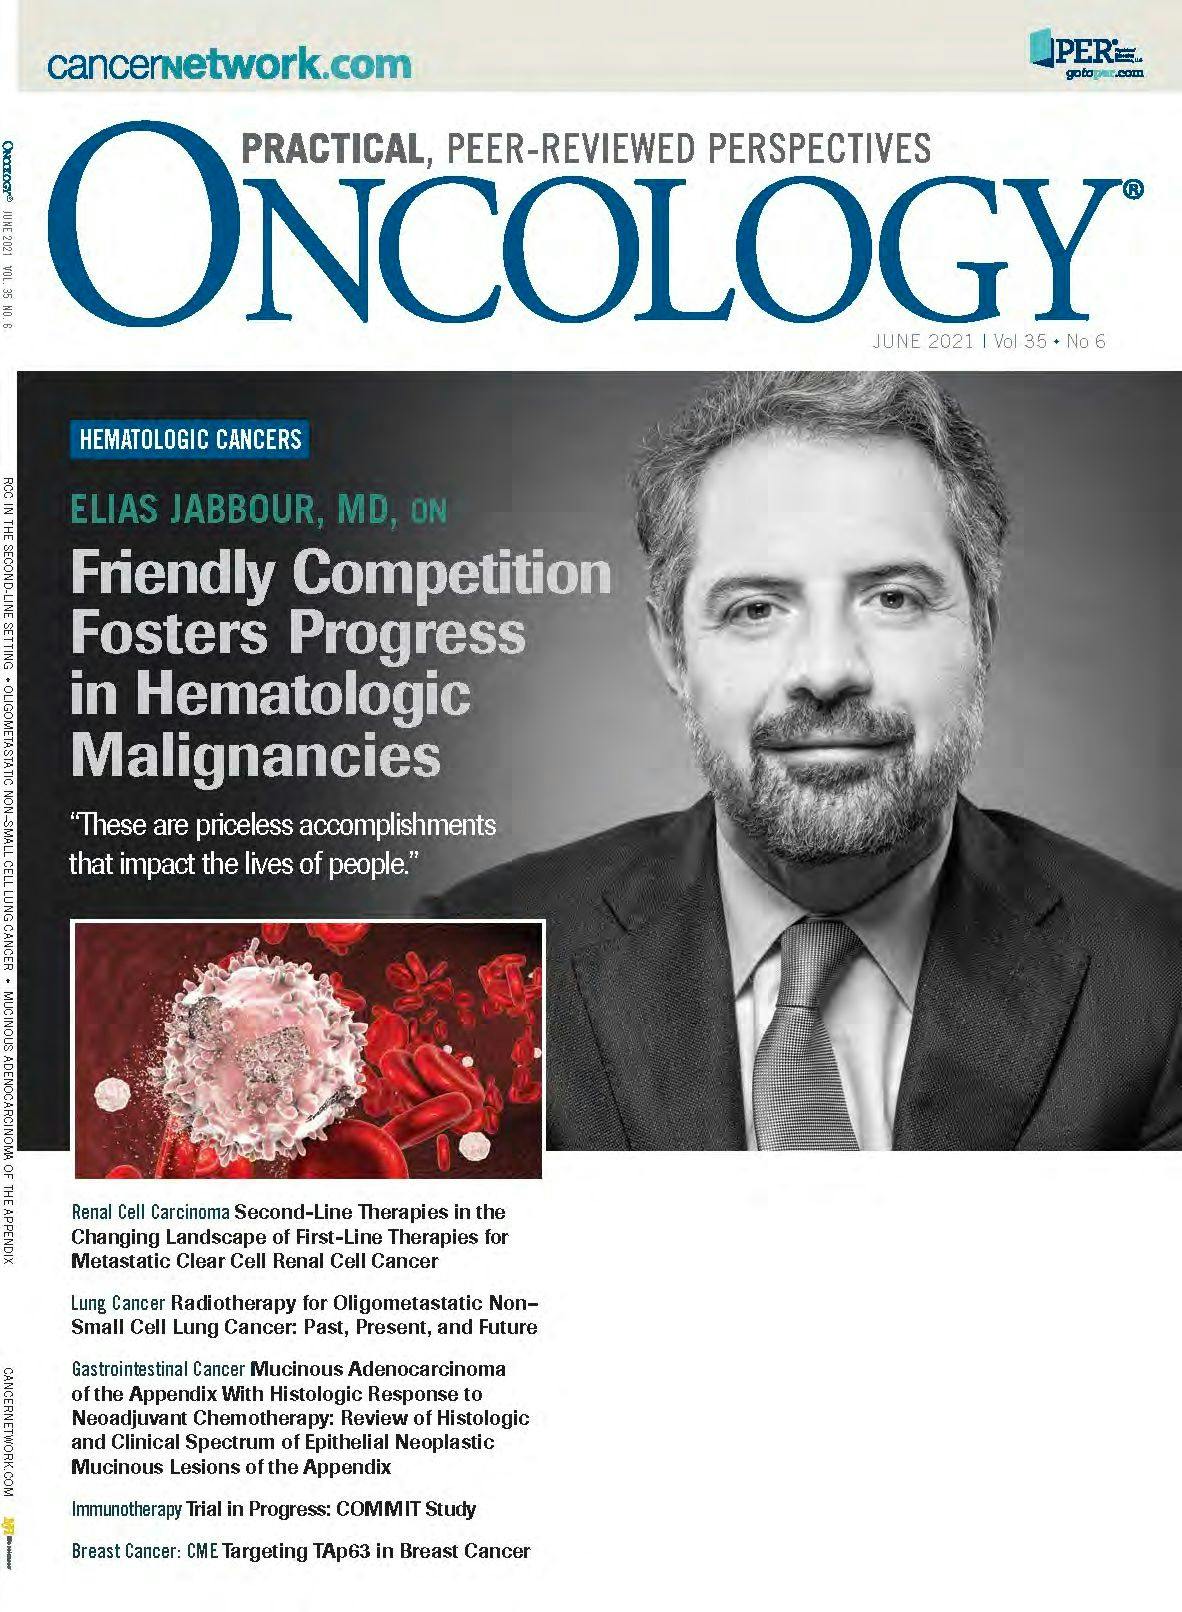 ONCOLOGY Vol 35, Issue 6